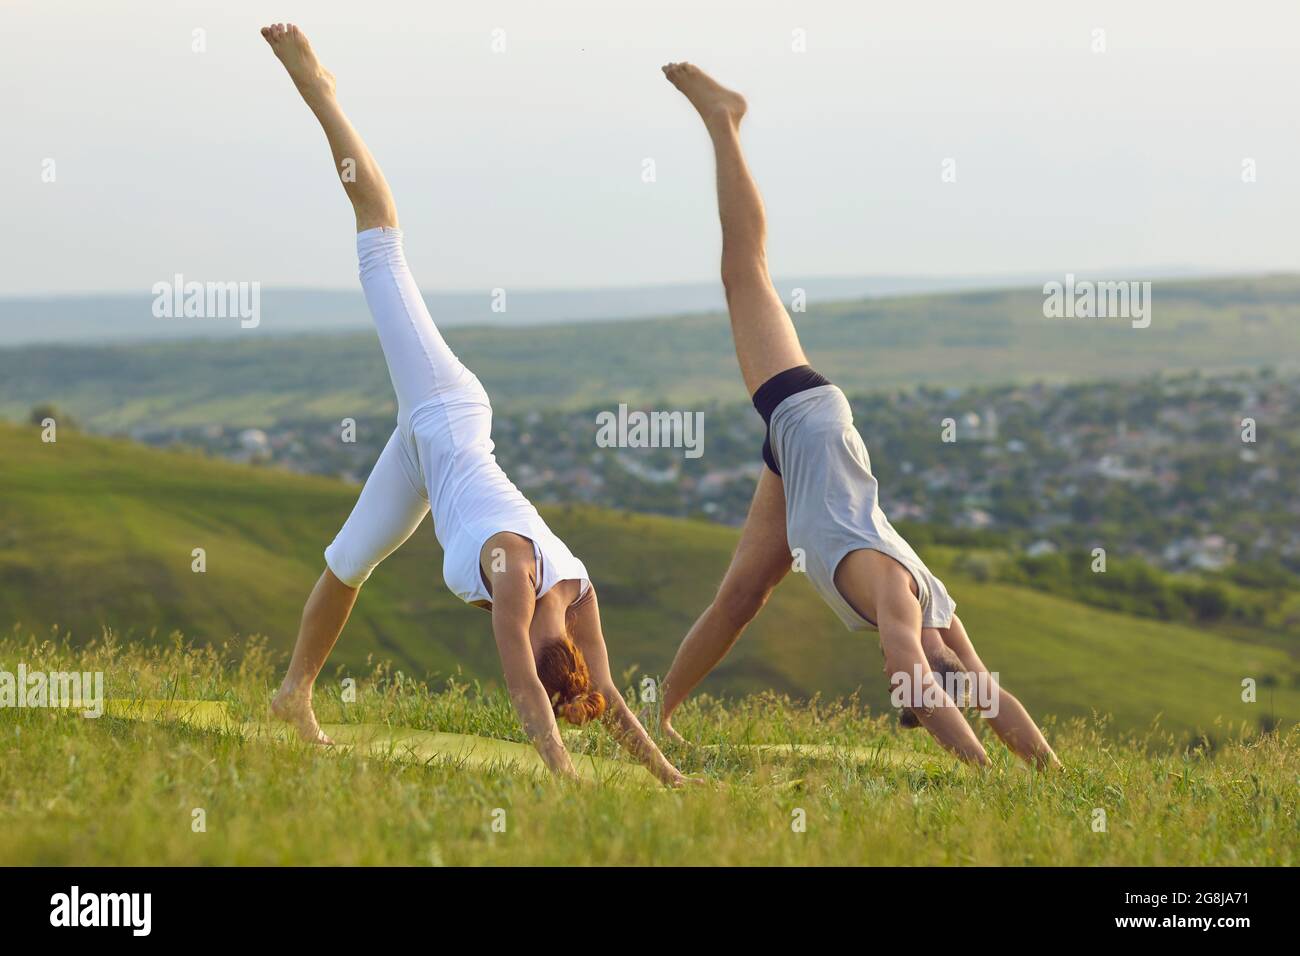 Man and woman doing One-Legged Down Dog asana together while practicing yoga in nature Stock Photo